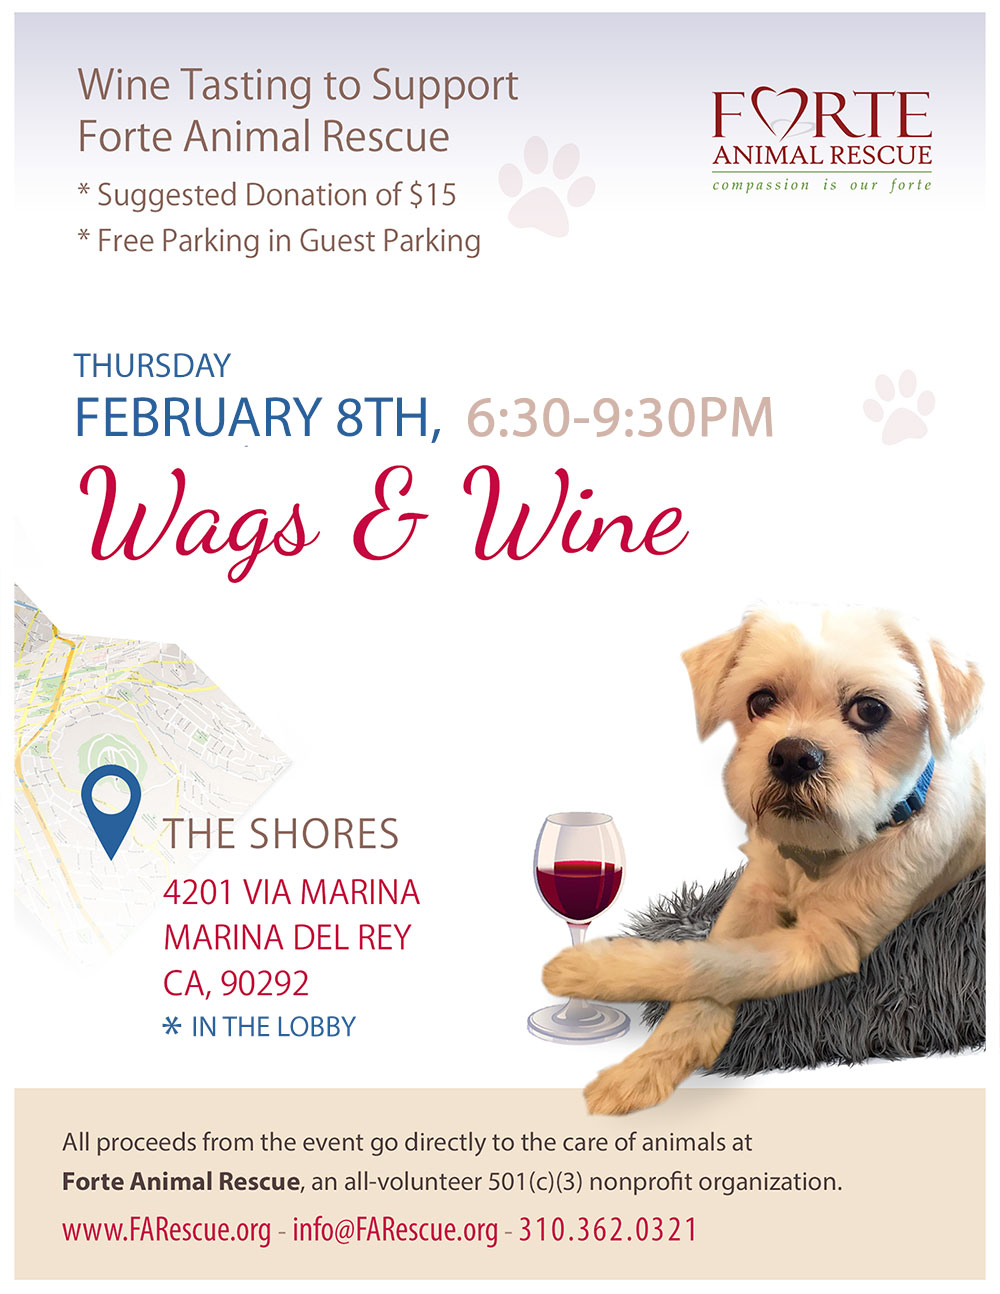 Wags & Wine Tasting to Support Forte Animal Rescue